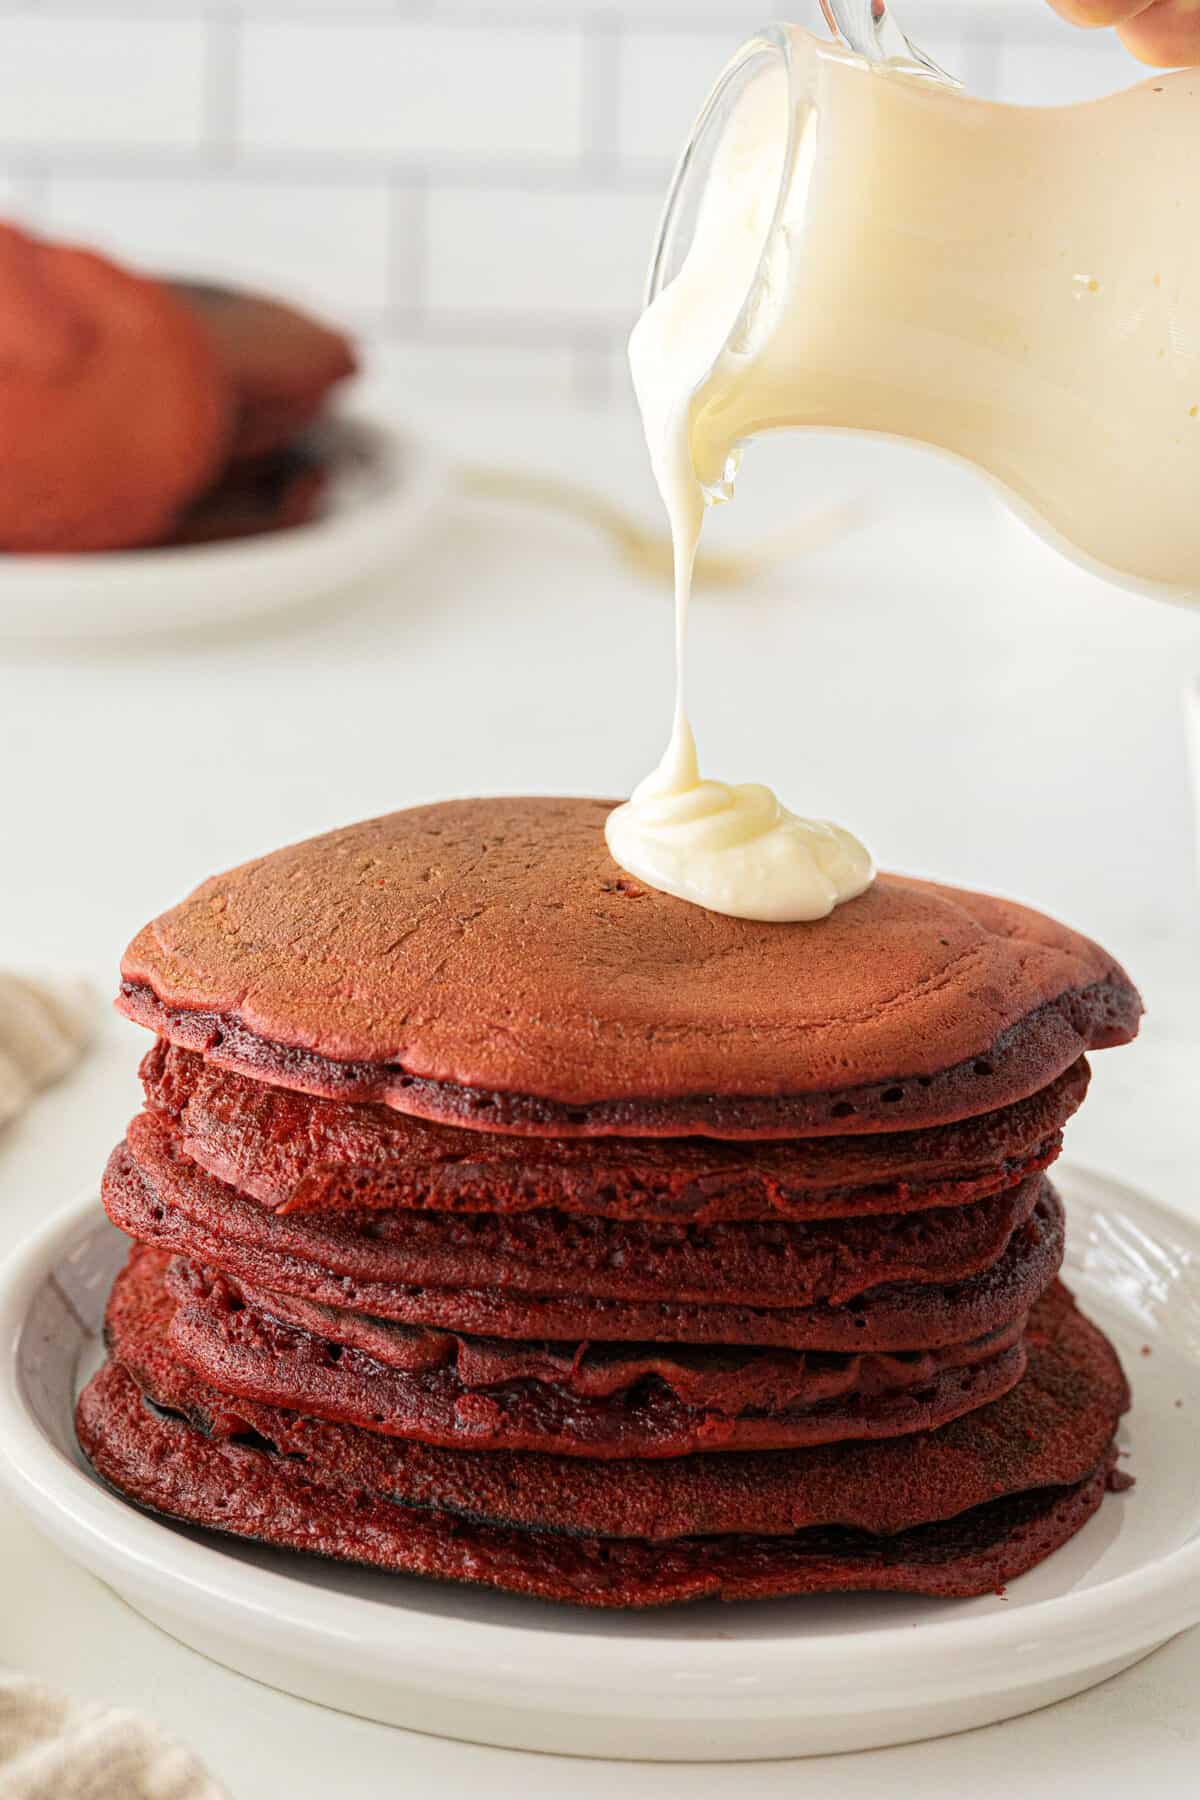 icing being poured on a stack of red velvet pancakes